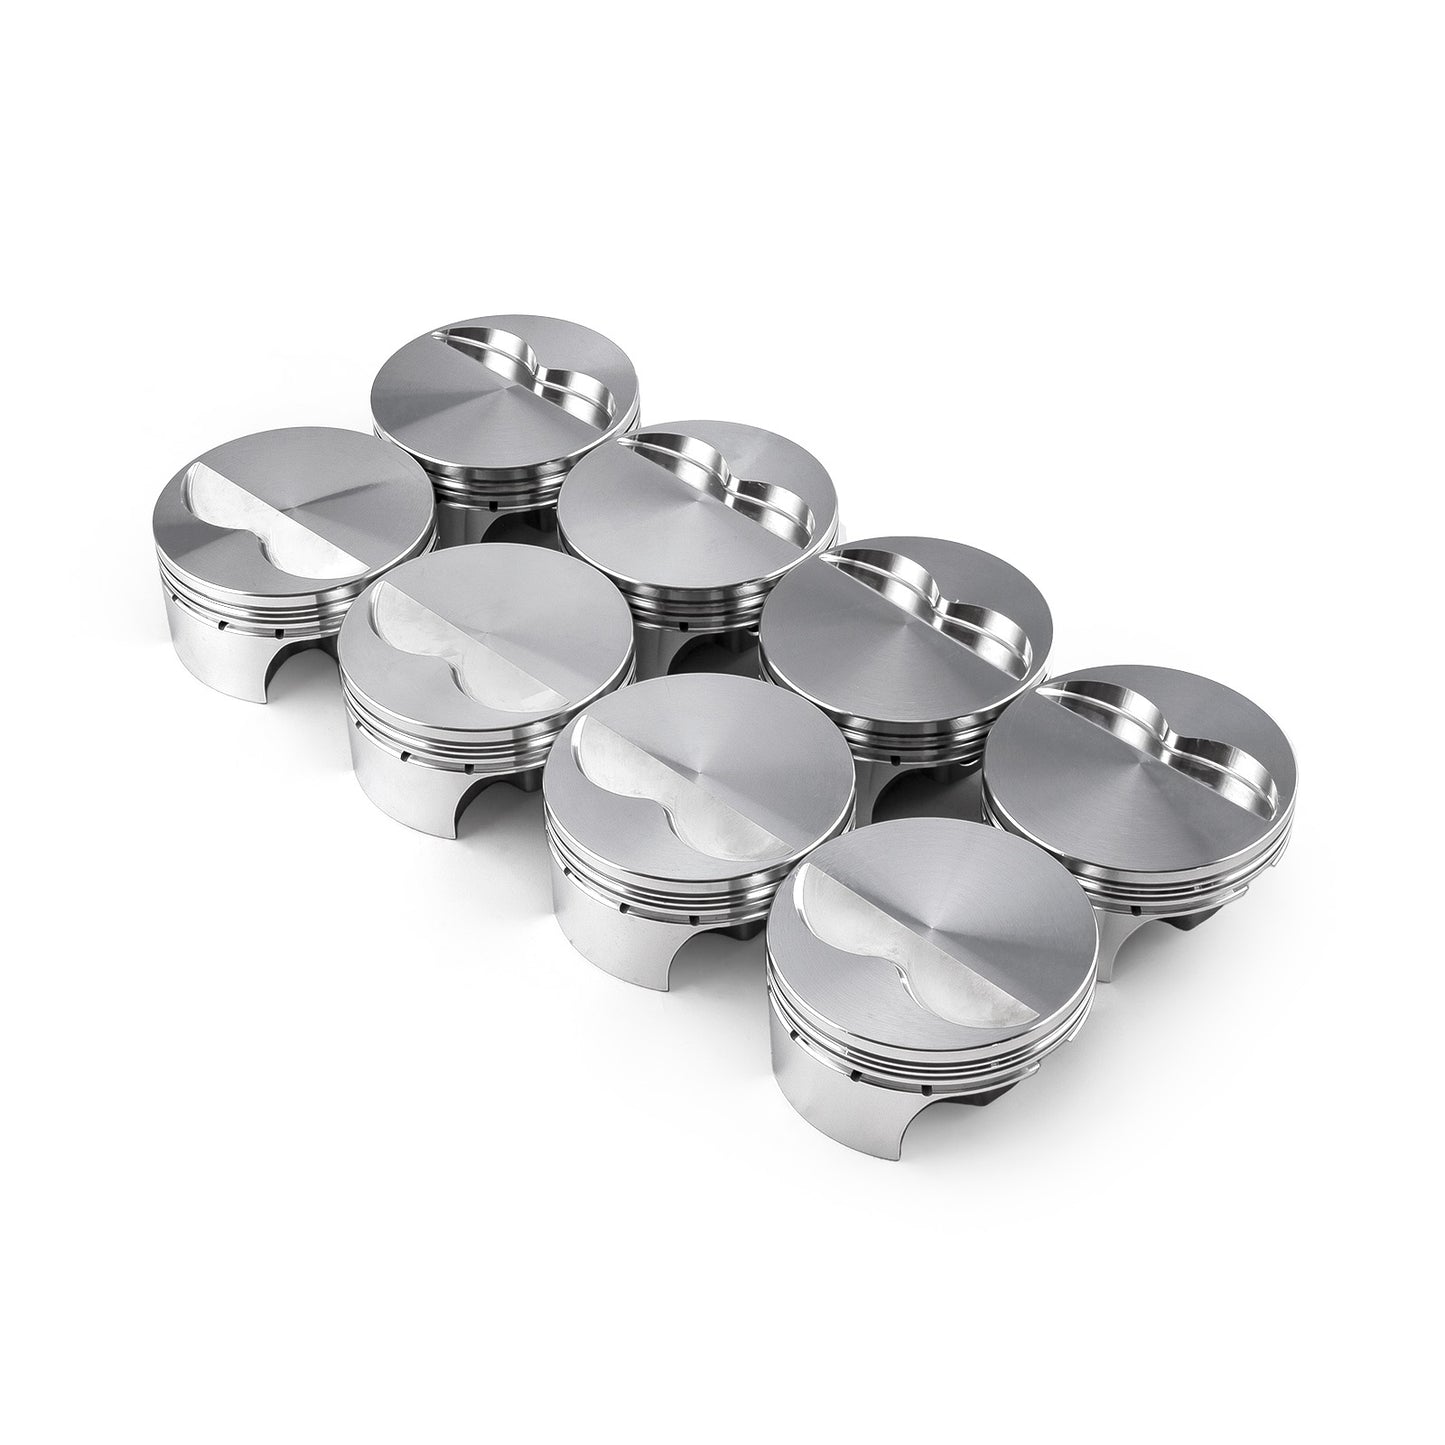 Speedmaster PCE305.1016 Fits Chevy SBC 383 Ci 6.0" 4.020" 1.100" 0.927" Flat Top Forged Pistons